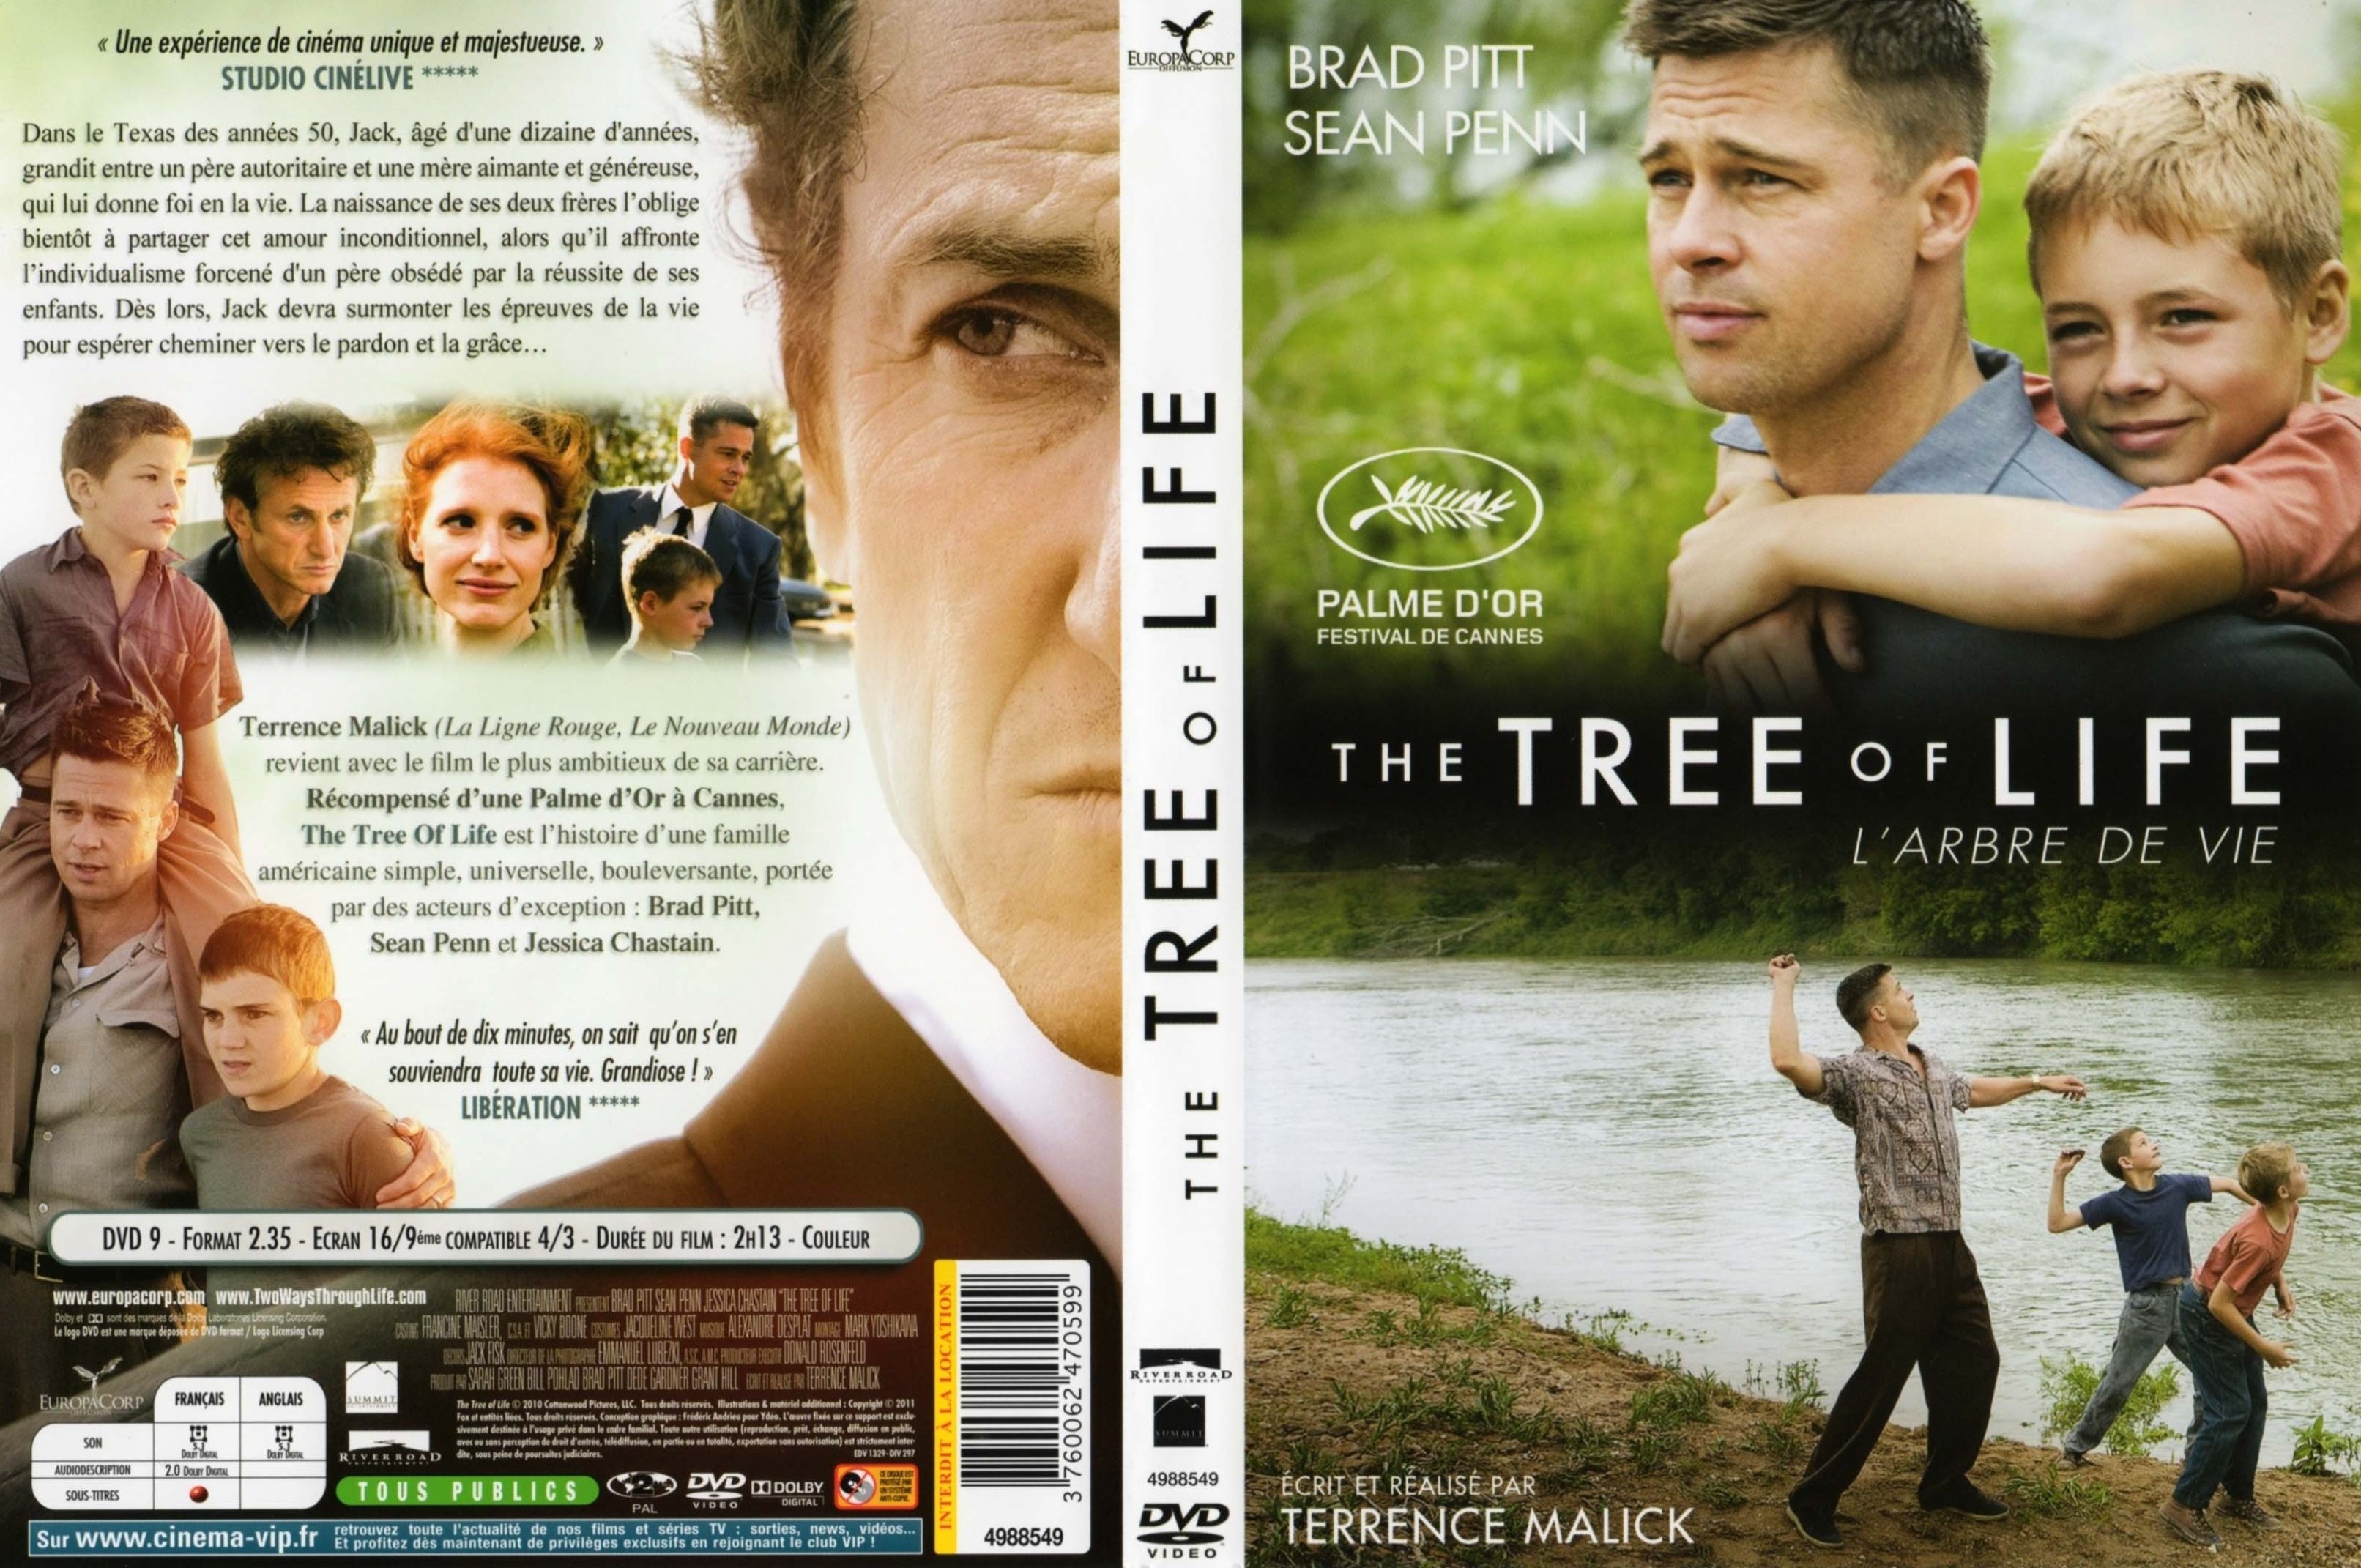 Jaquette DVD The tree of life v2